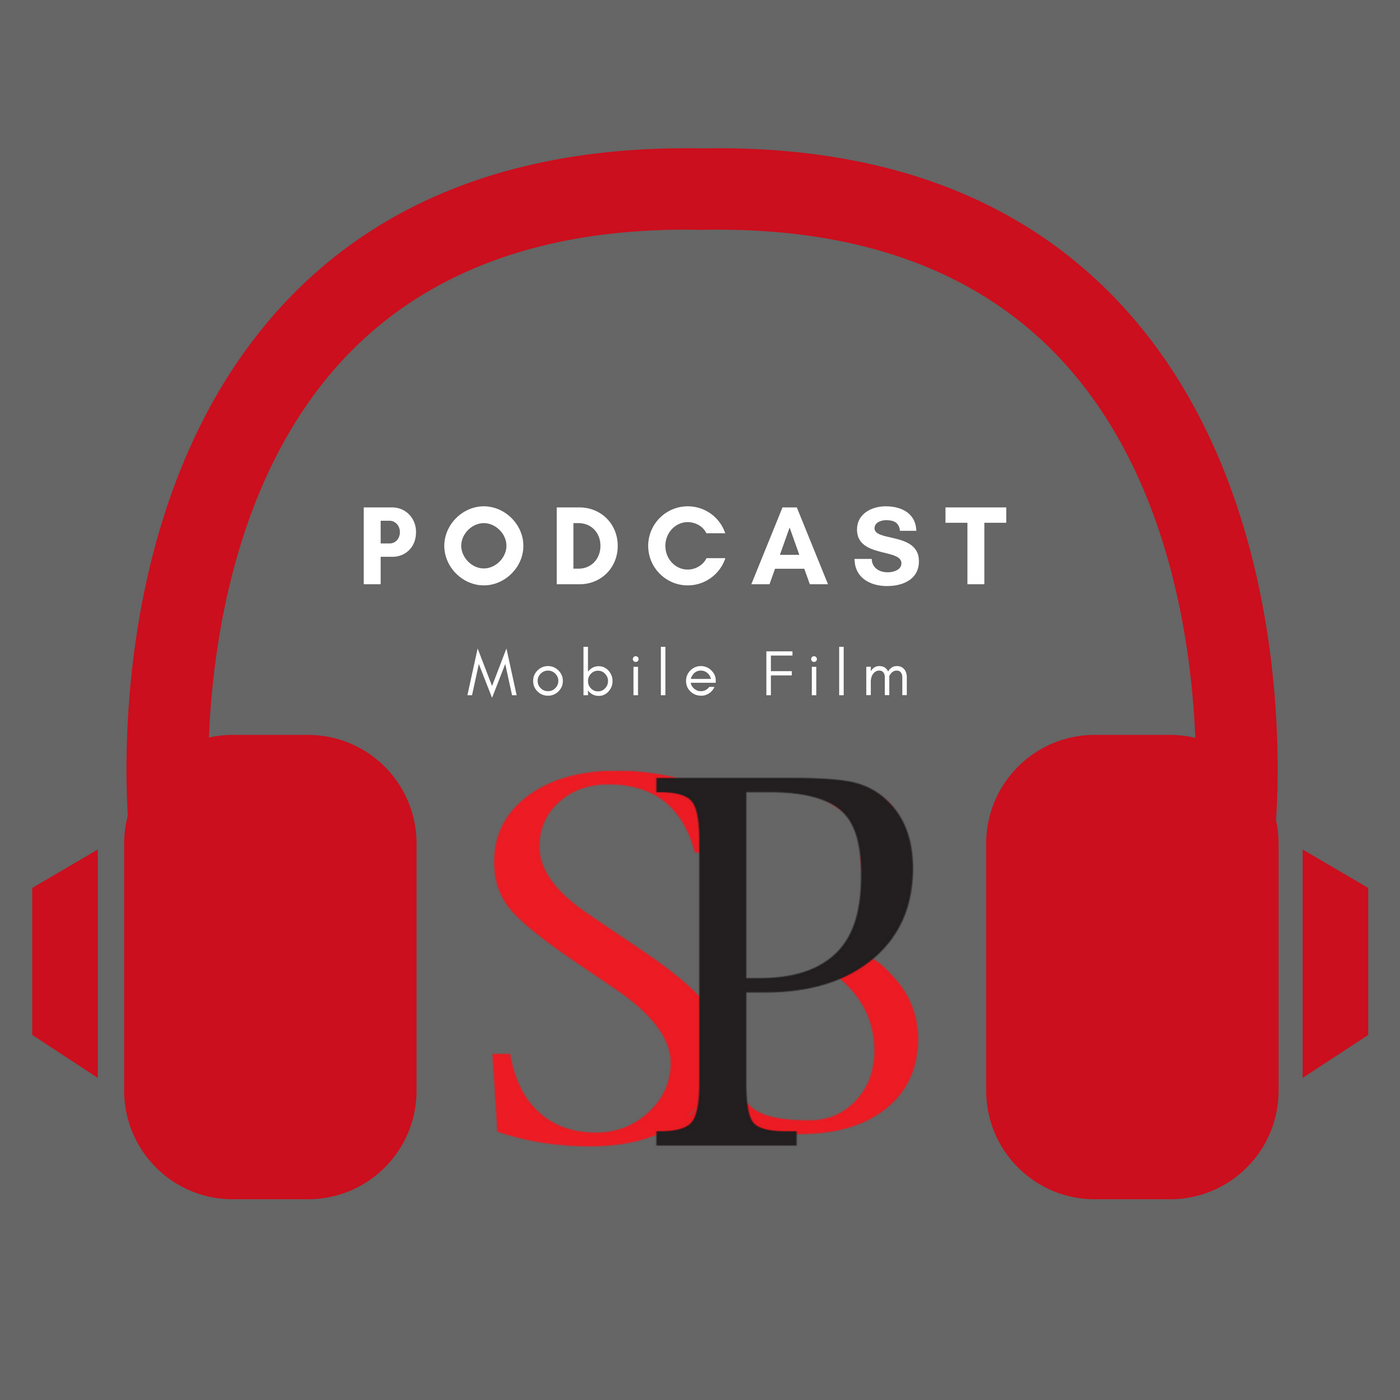 Sponsoring the International Mobile Film Festival and Audio Production with Jana and Neal Hallford Episode 35 Image